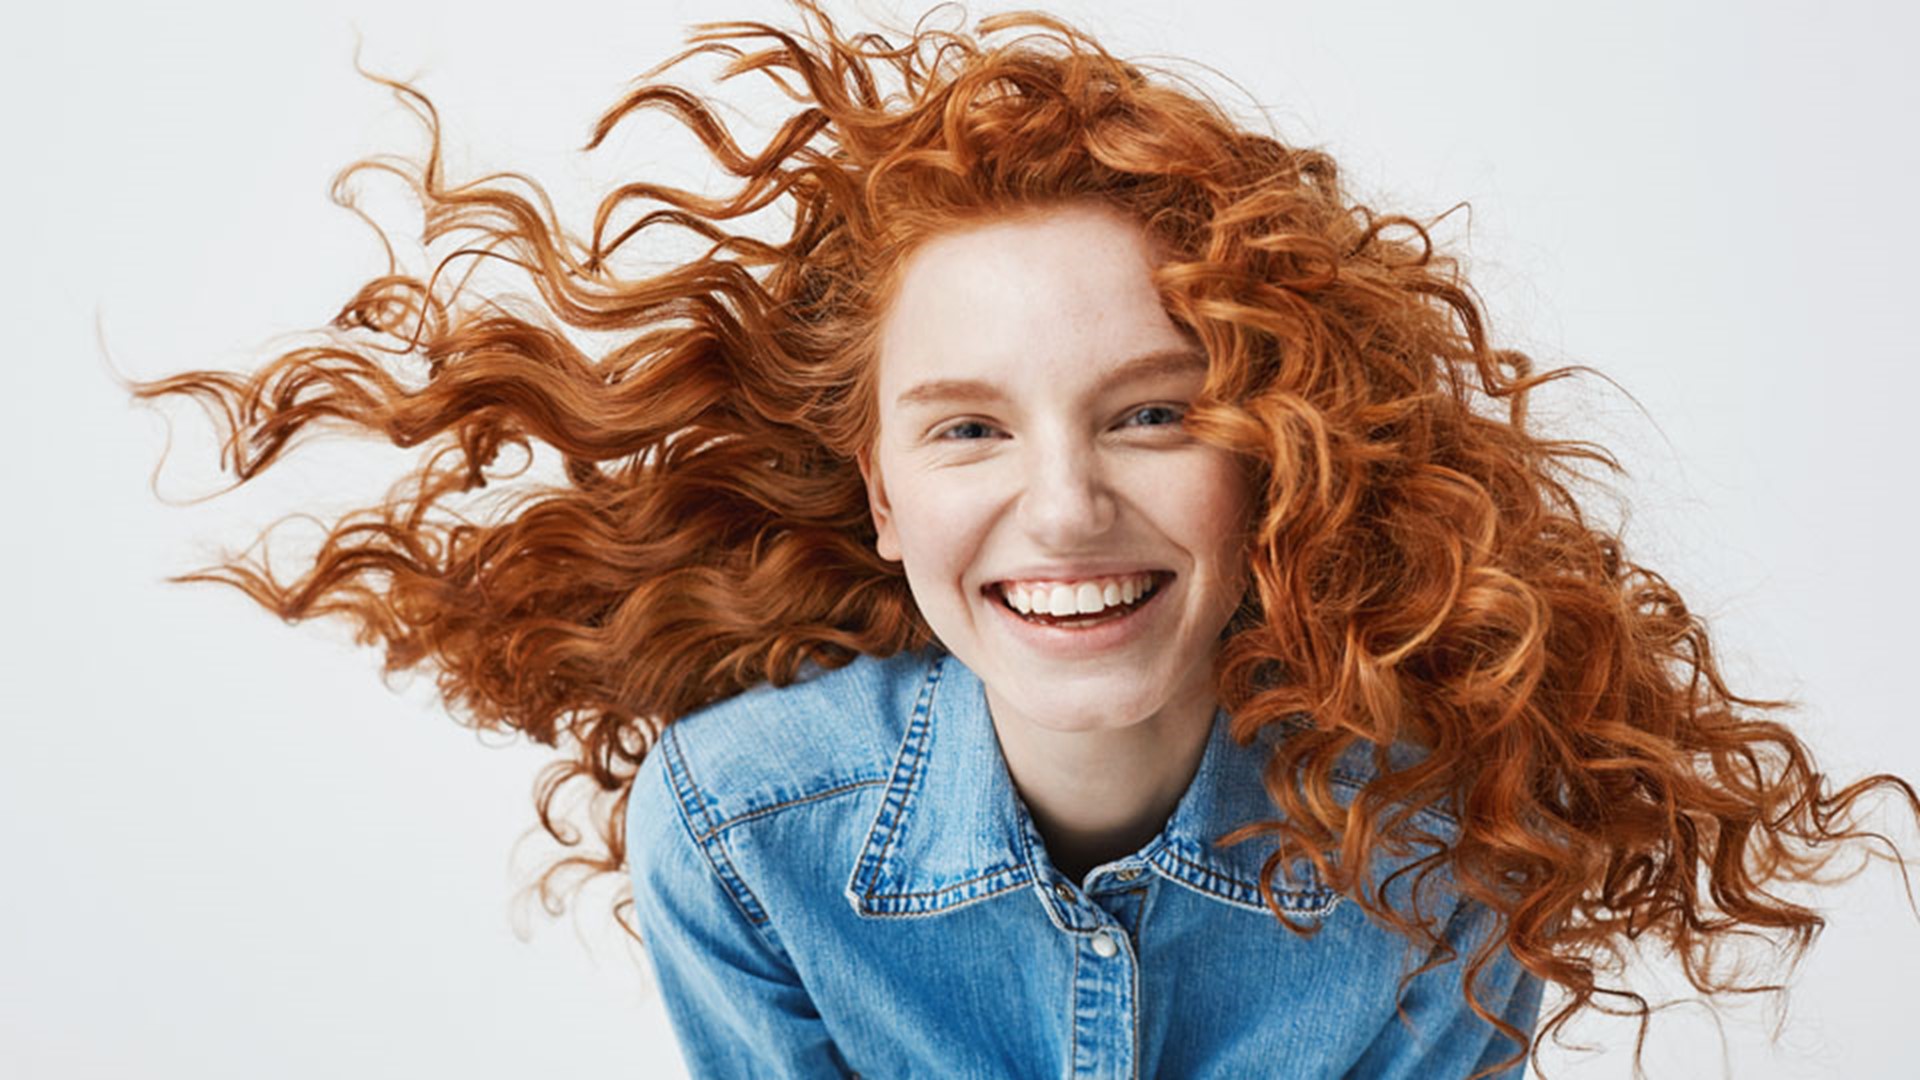 World Redhead Day is May 26! Here are 10 fun facts about red hair